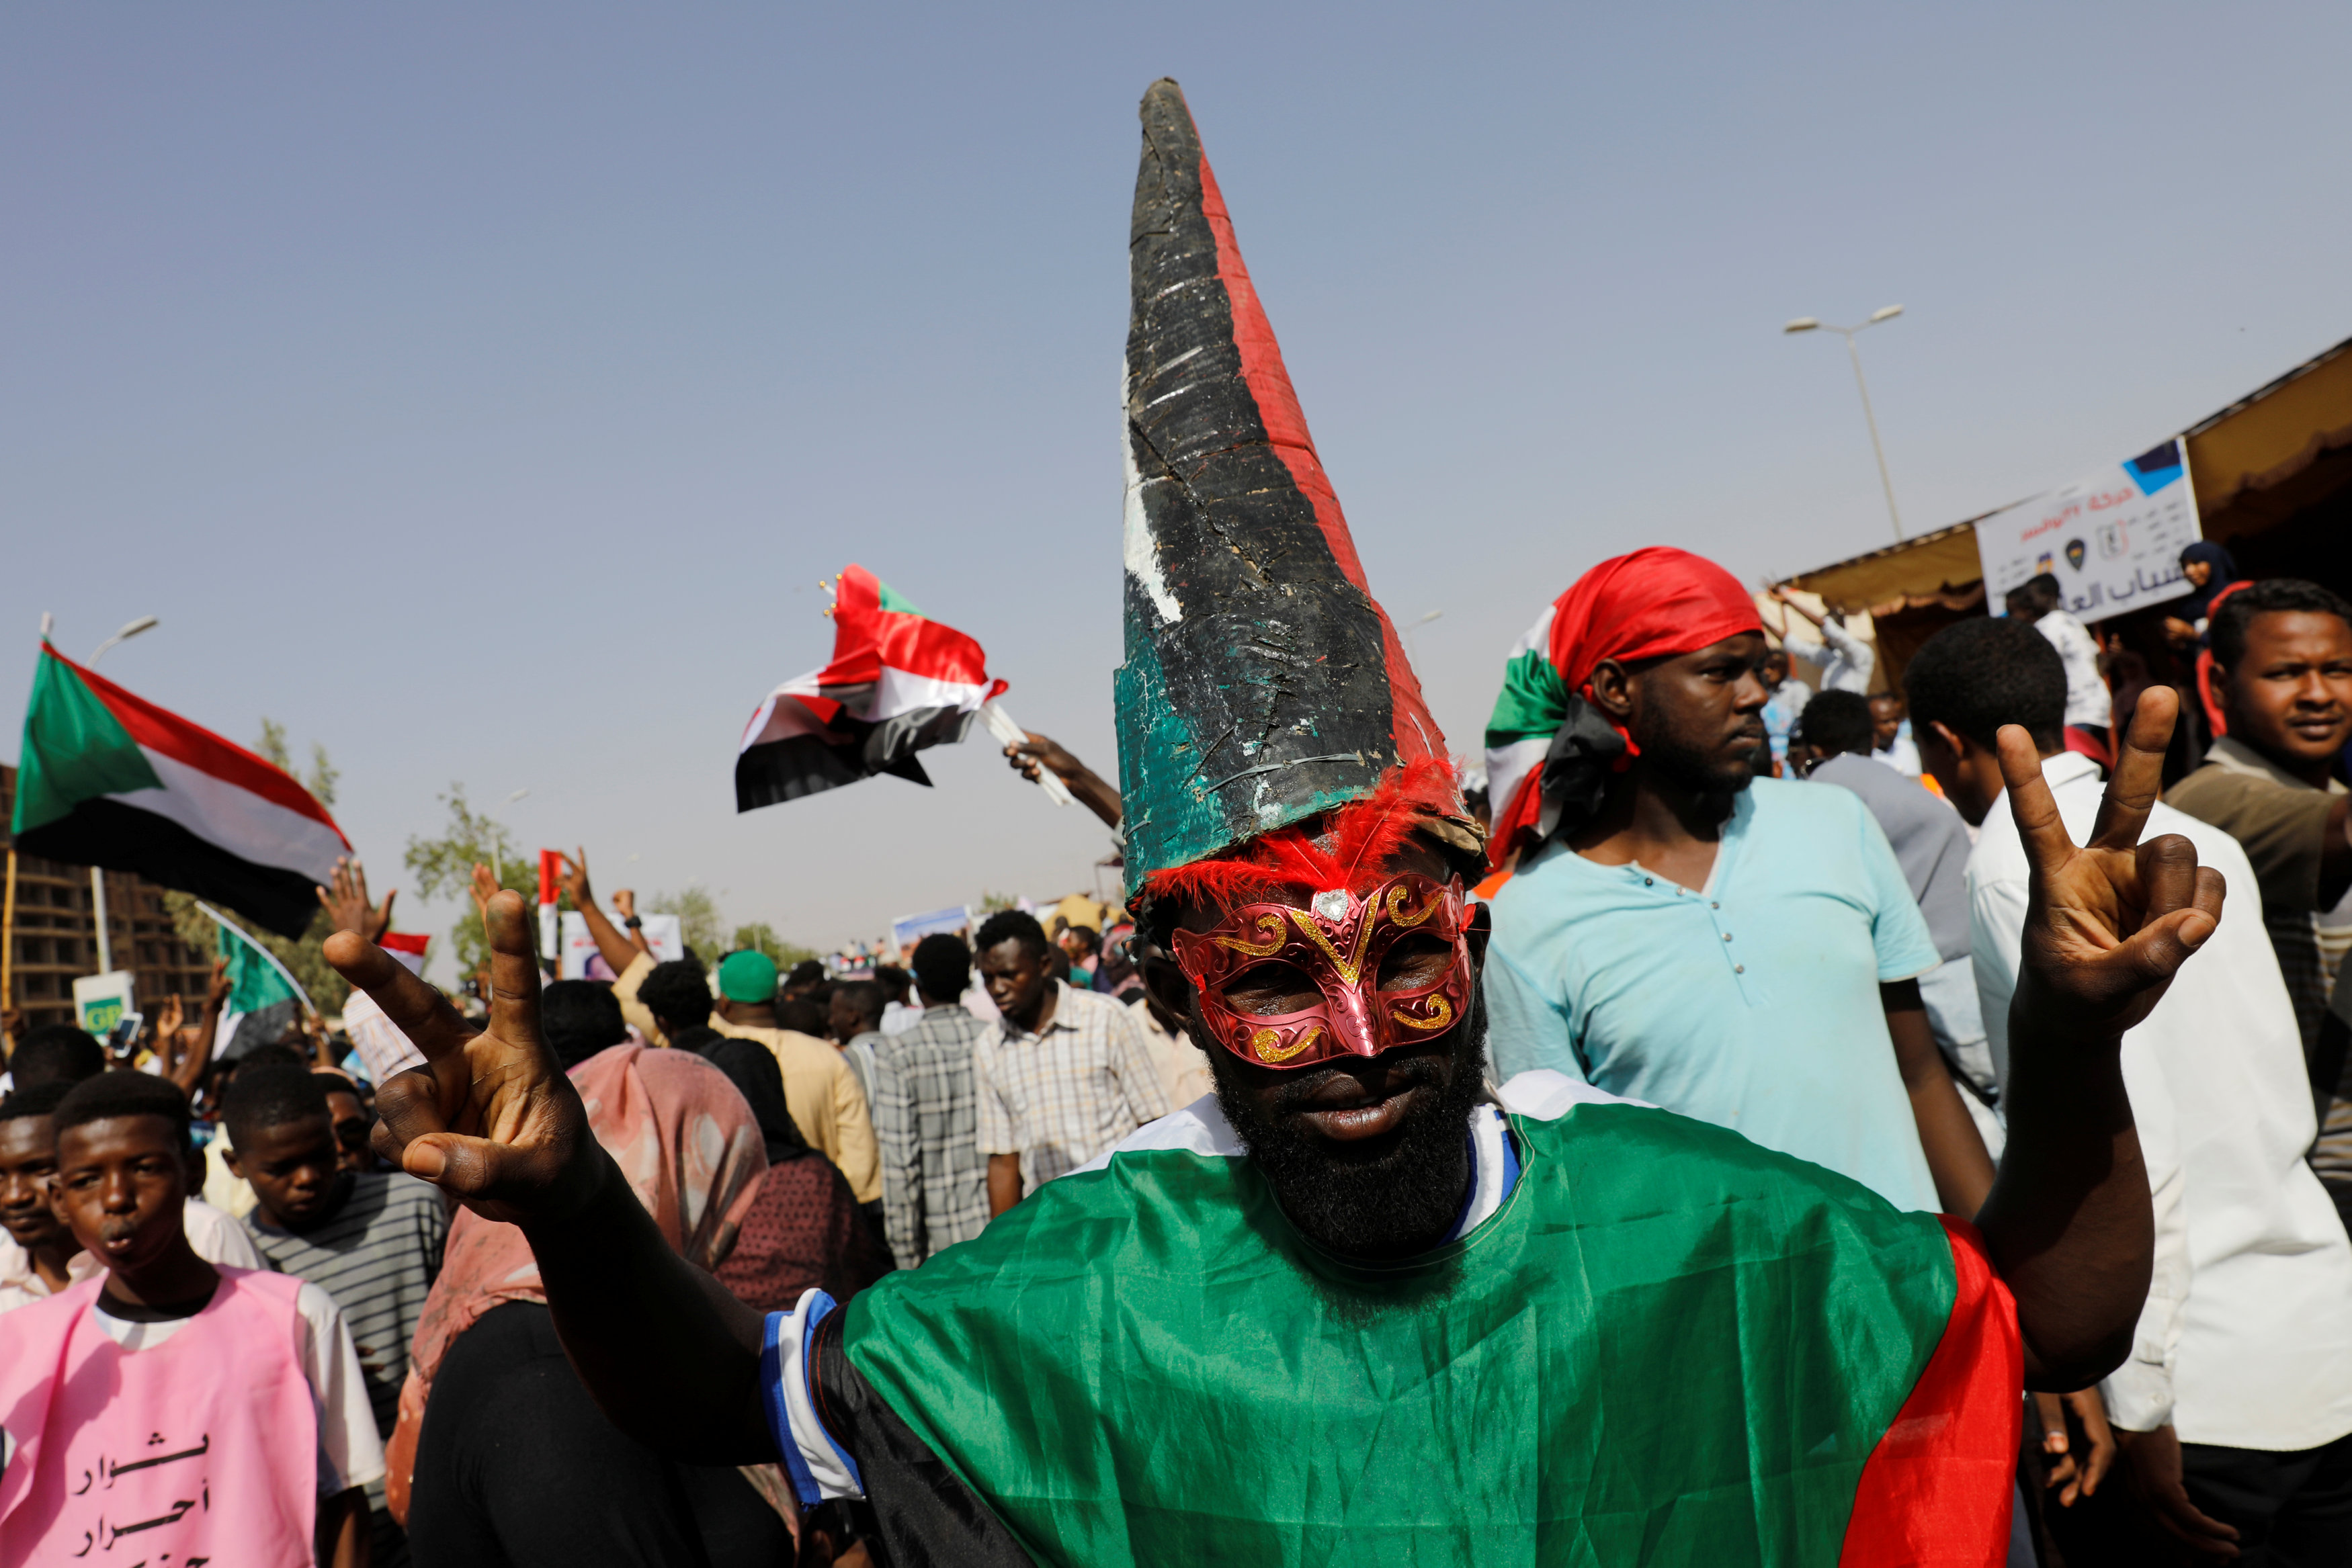 A Sudanese protester makes a victory sign outside the defence ministry compound in Khartoum (Reuters)